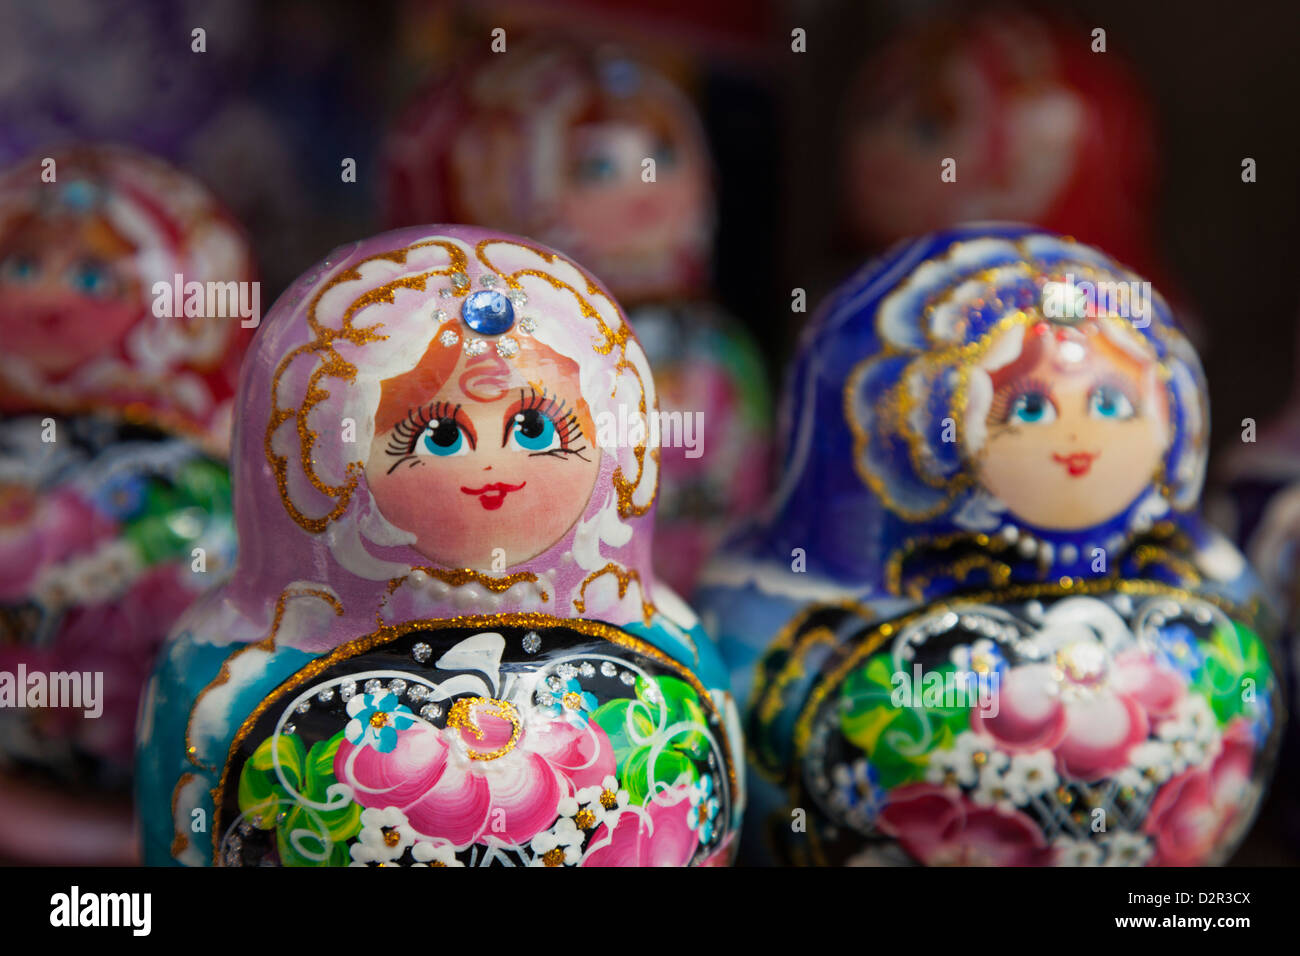 Decorative Russian dolls for sale, St. Petersburg, Russia, Europe Stock Photo